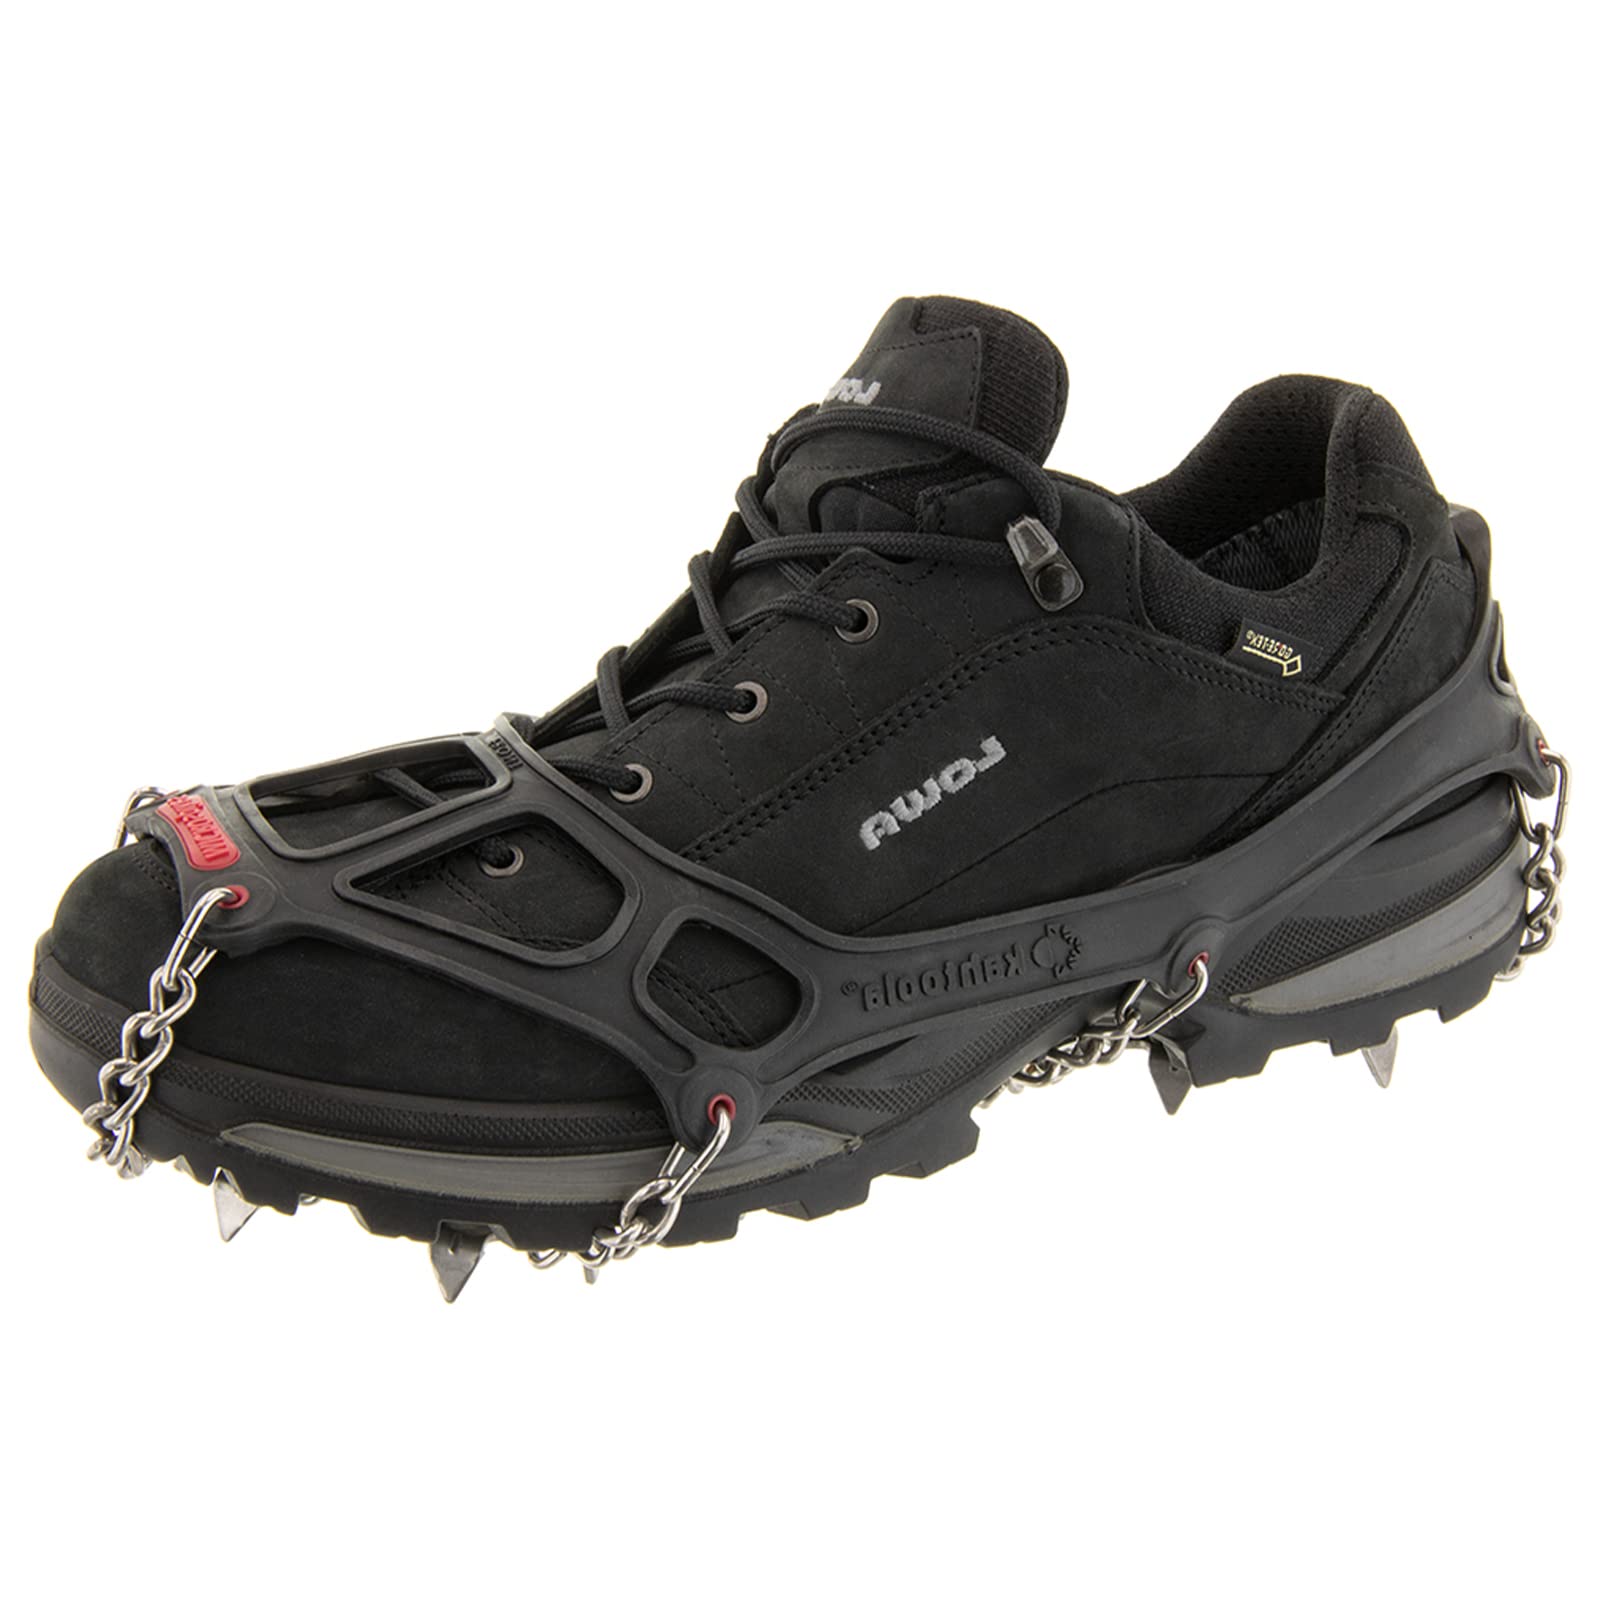 Kahtoola MICROspikes Footwear Traction for Winter Trail...